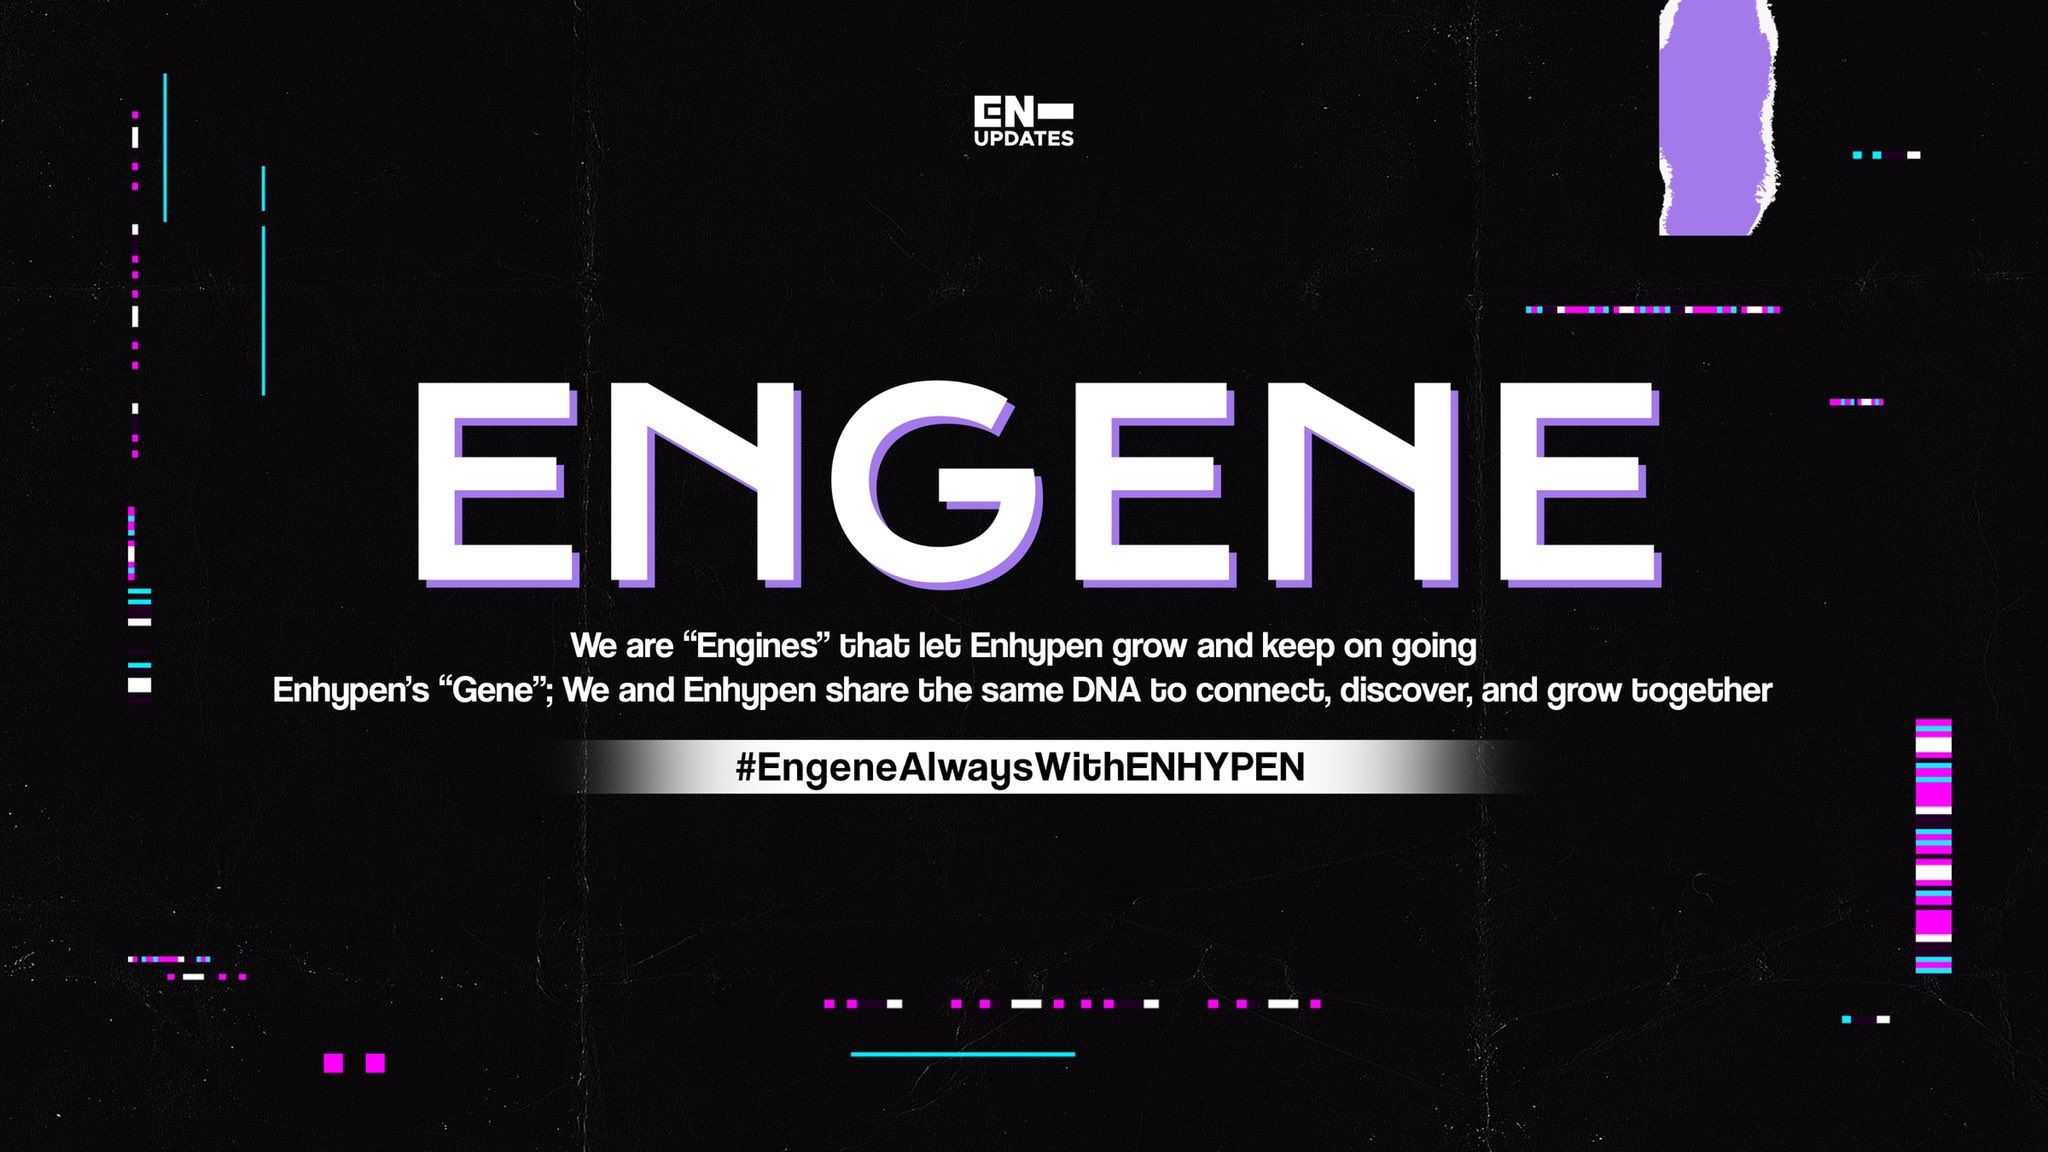 ENHYPEN UPDATES months and weeks of waiting, our fandom name is finally born. Let us all treasure this name as we journey along with ENHYPEN and their debut. Engene